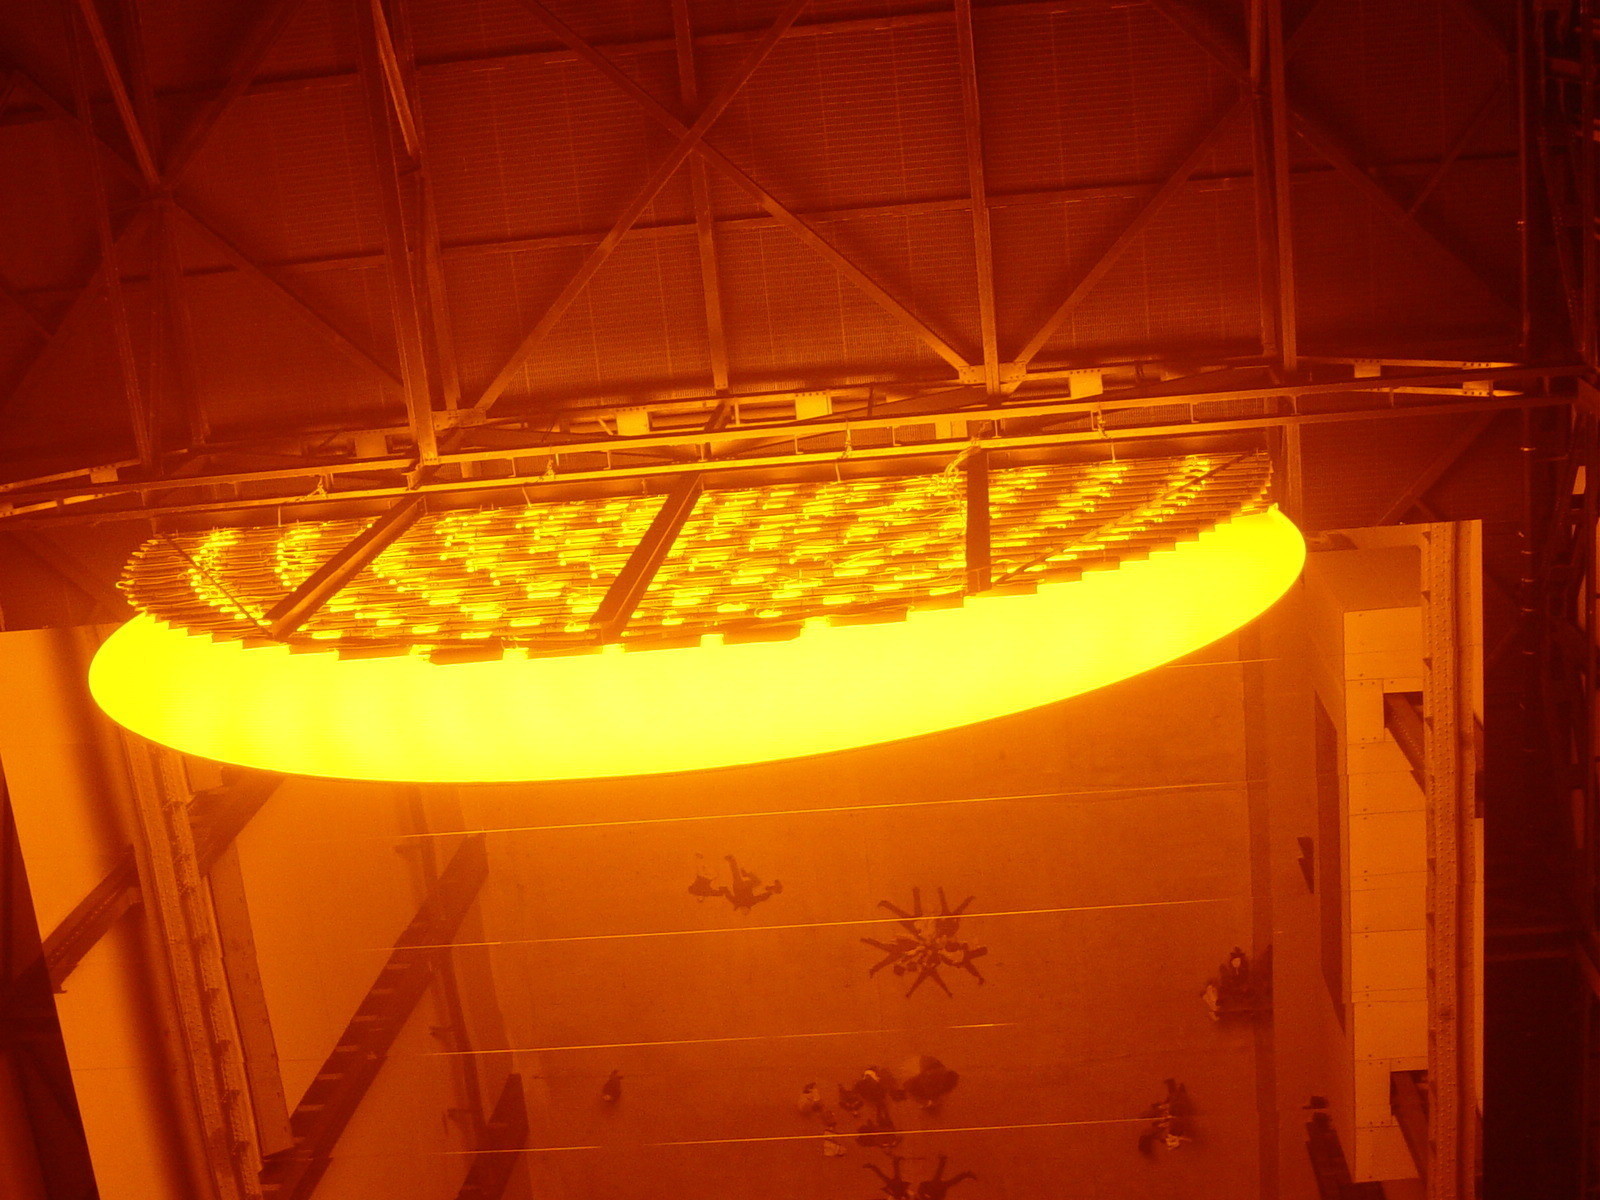 Olafur Eliasson. The Weather Project. 2003. Installation at Tate Modern, London, United Kingdom.